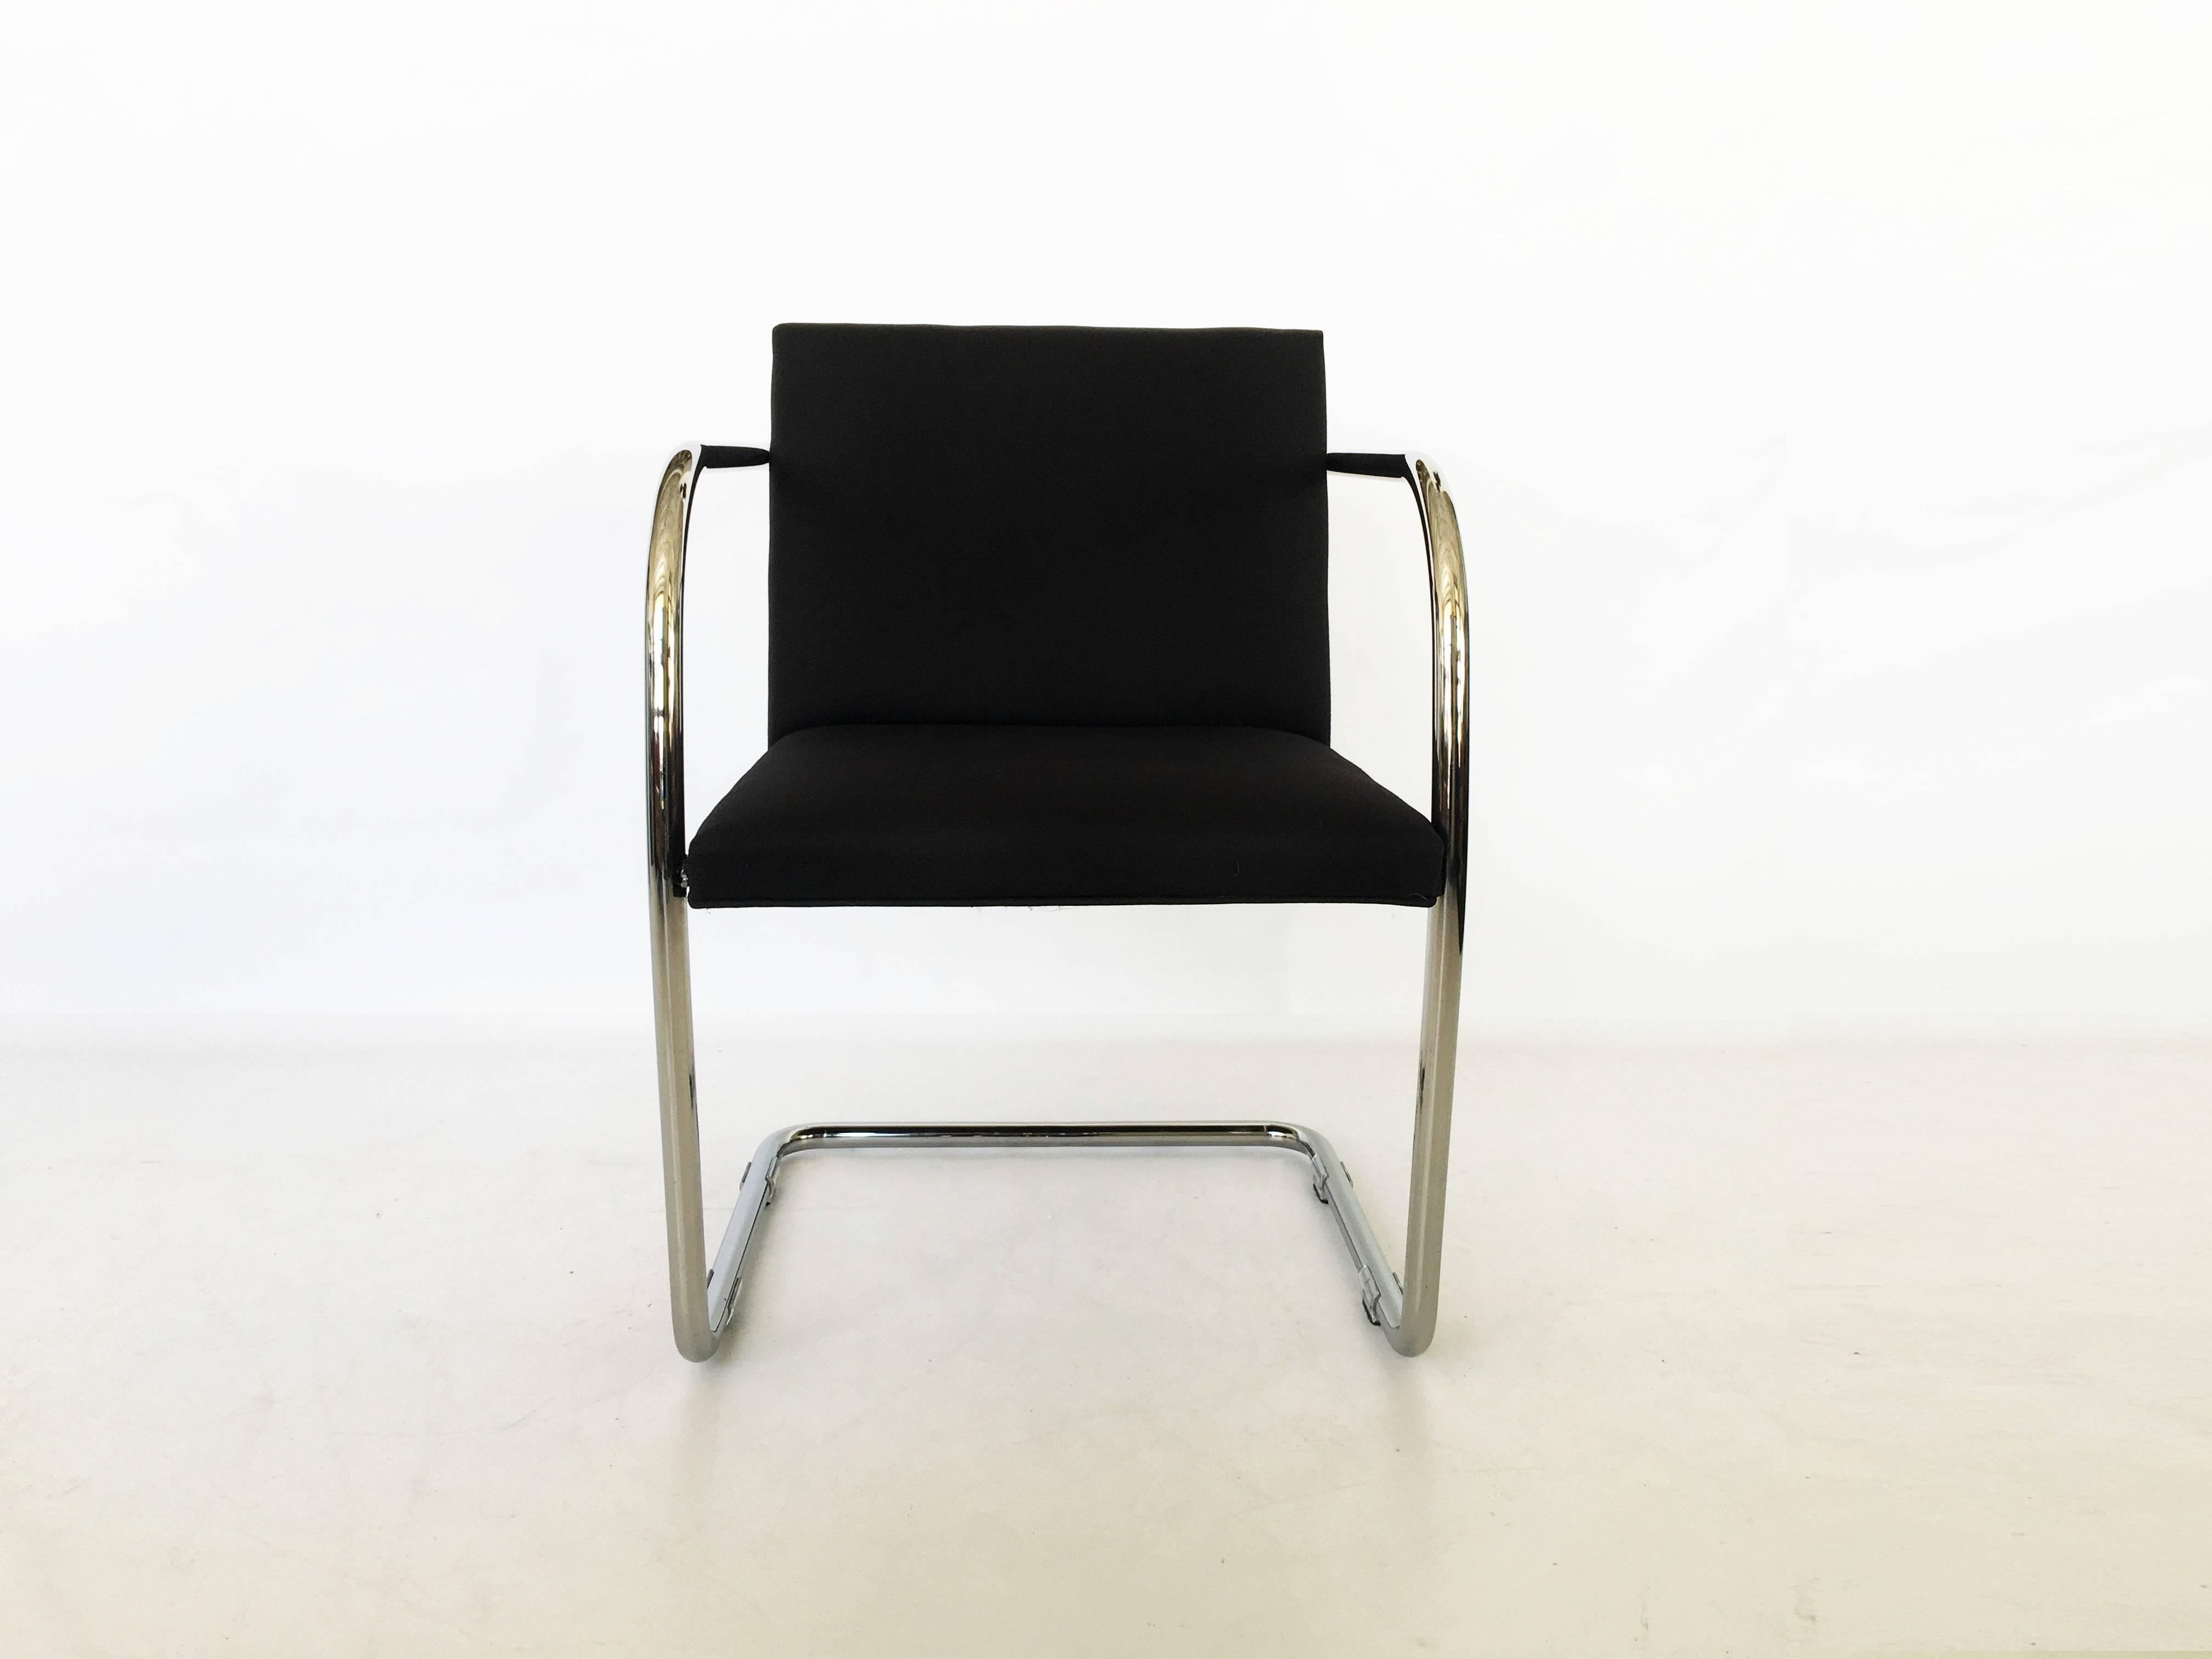 American Pair of Thonet Mies van der Rohe Brno Chairs For Sale